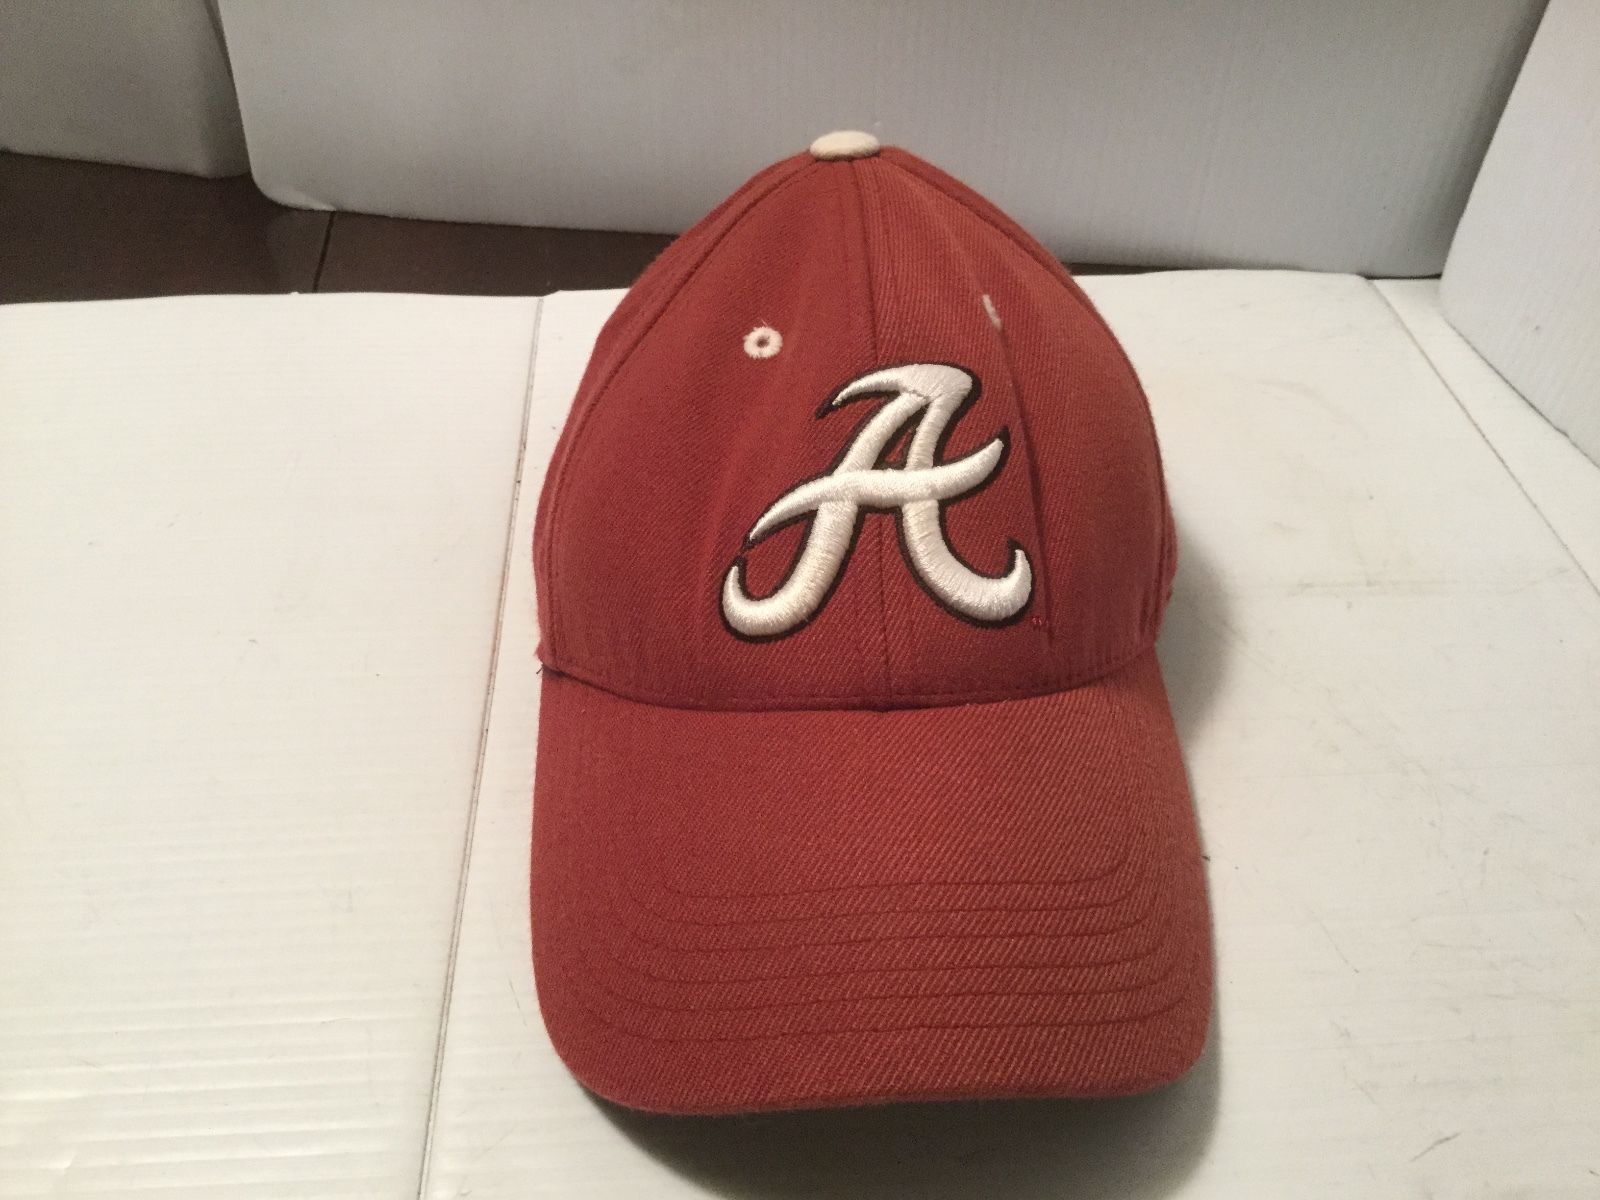 Primary image for Alabama Crimson Tide NCAA Adult One Fit Wool Blend Hat Cap Bama TOW A1